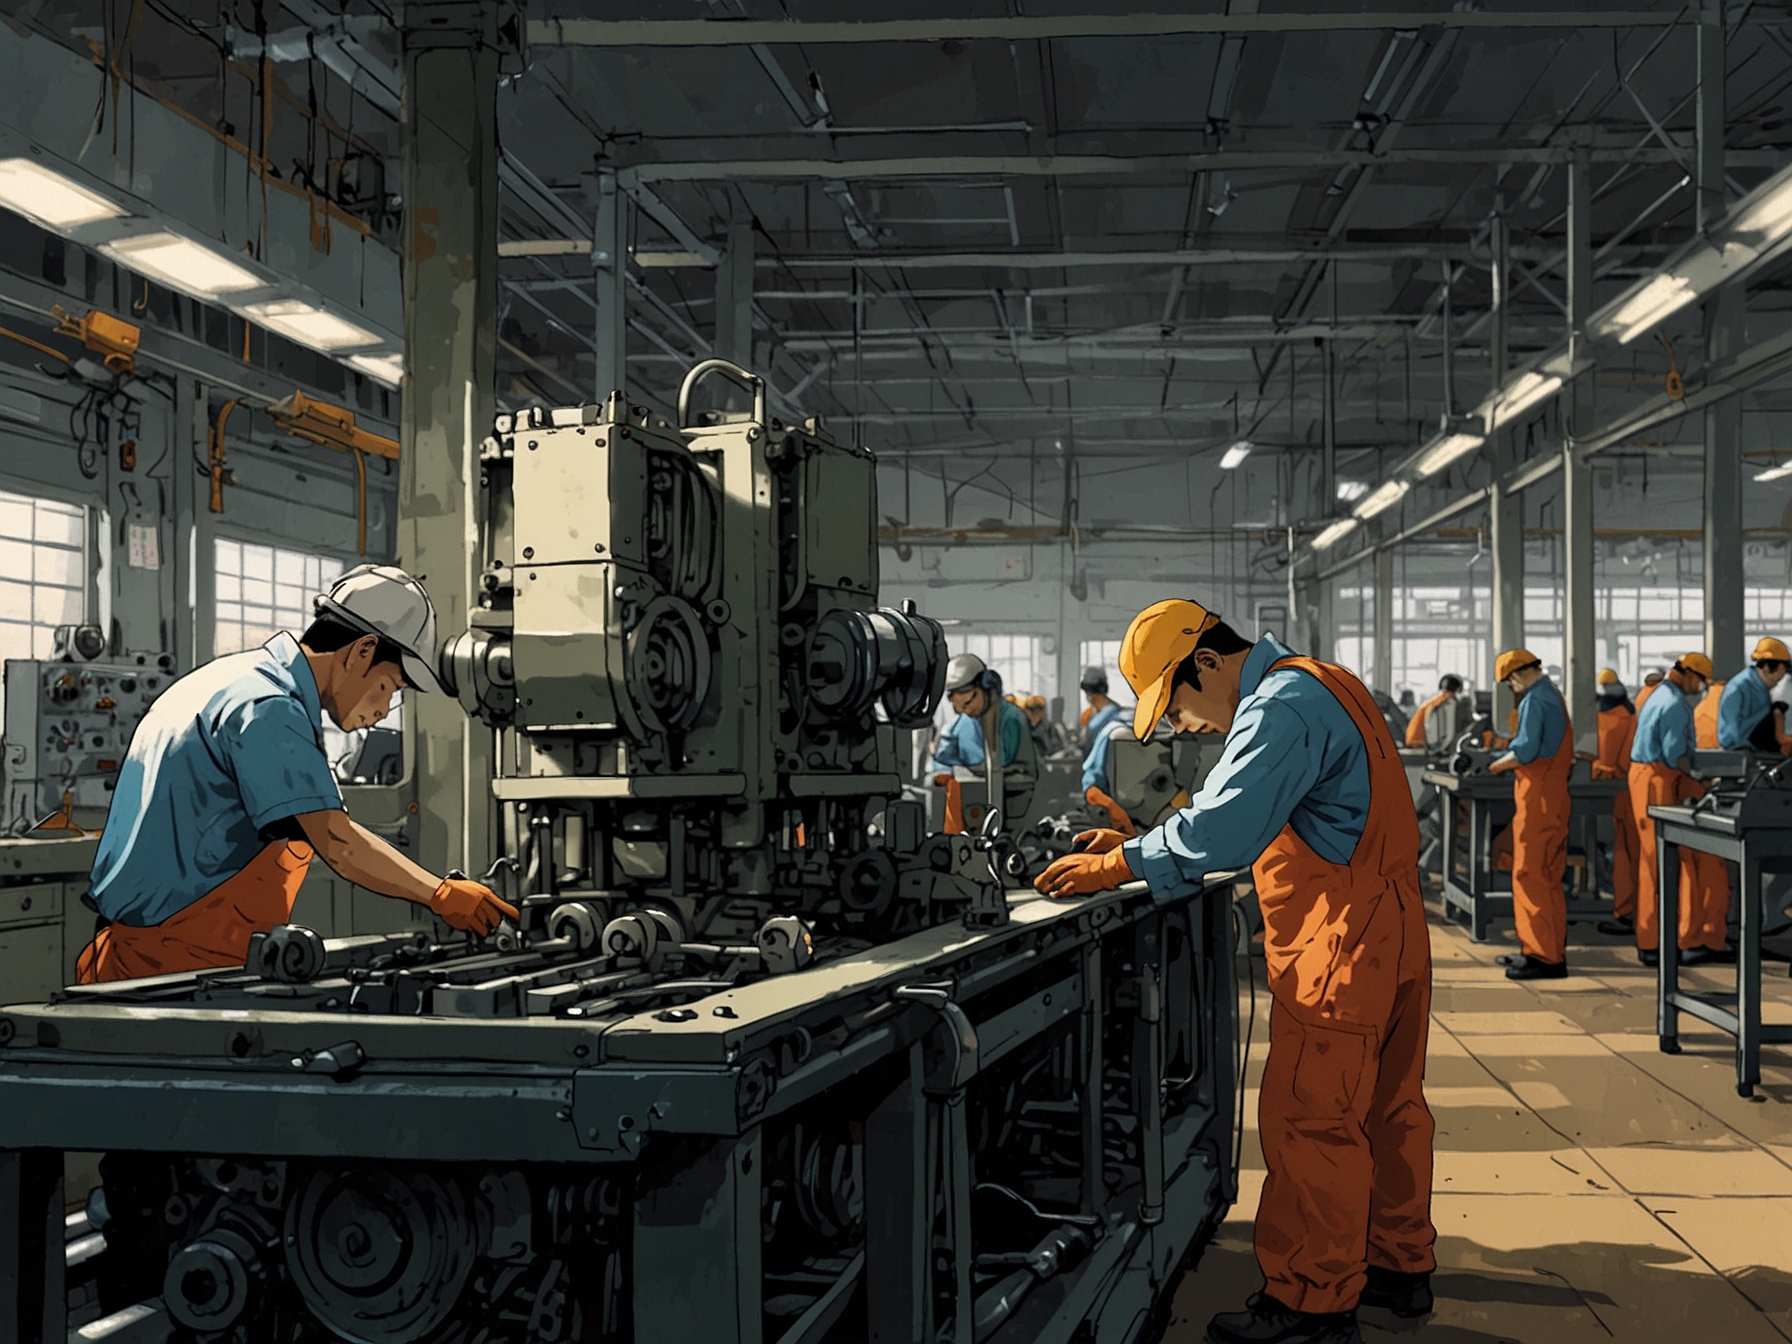 Workers in a Japanese manufacturing facility assembling machinery components, highlighting the challenges faced due to supply chain disruptions and the anticipation of future growth.